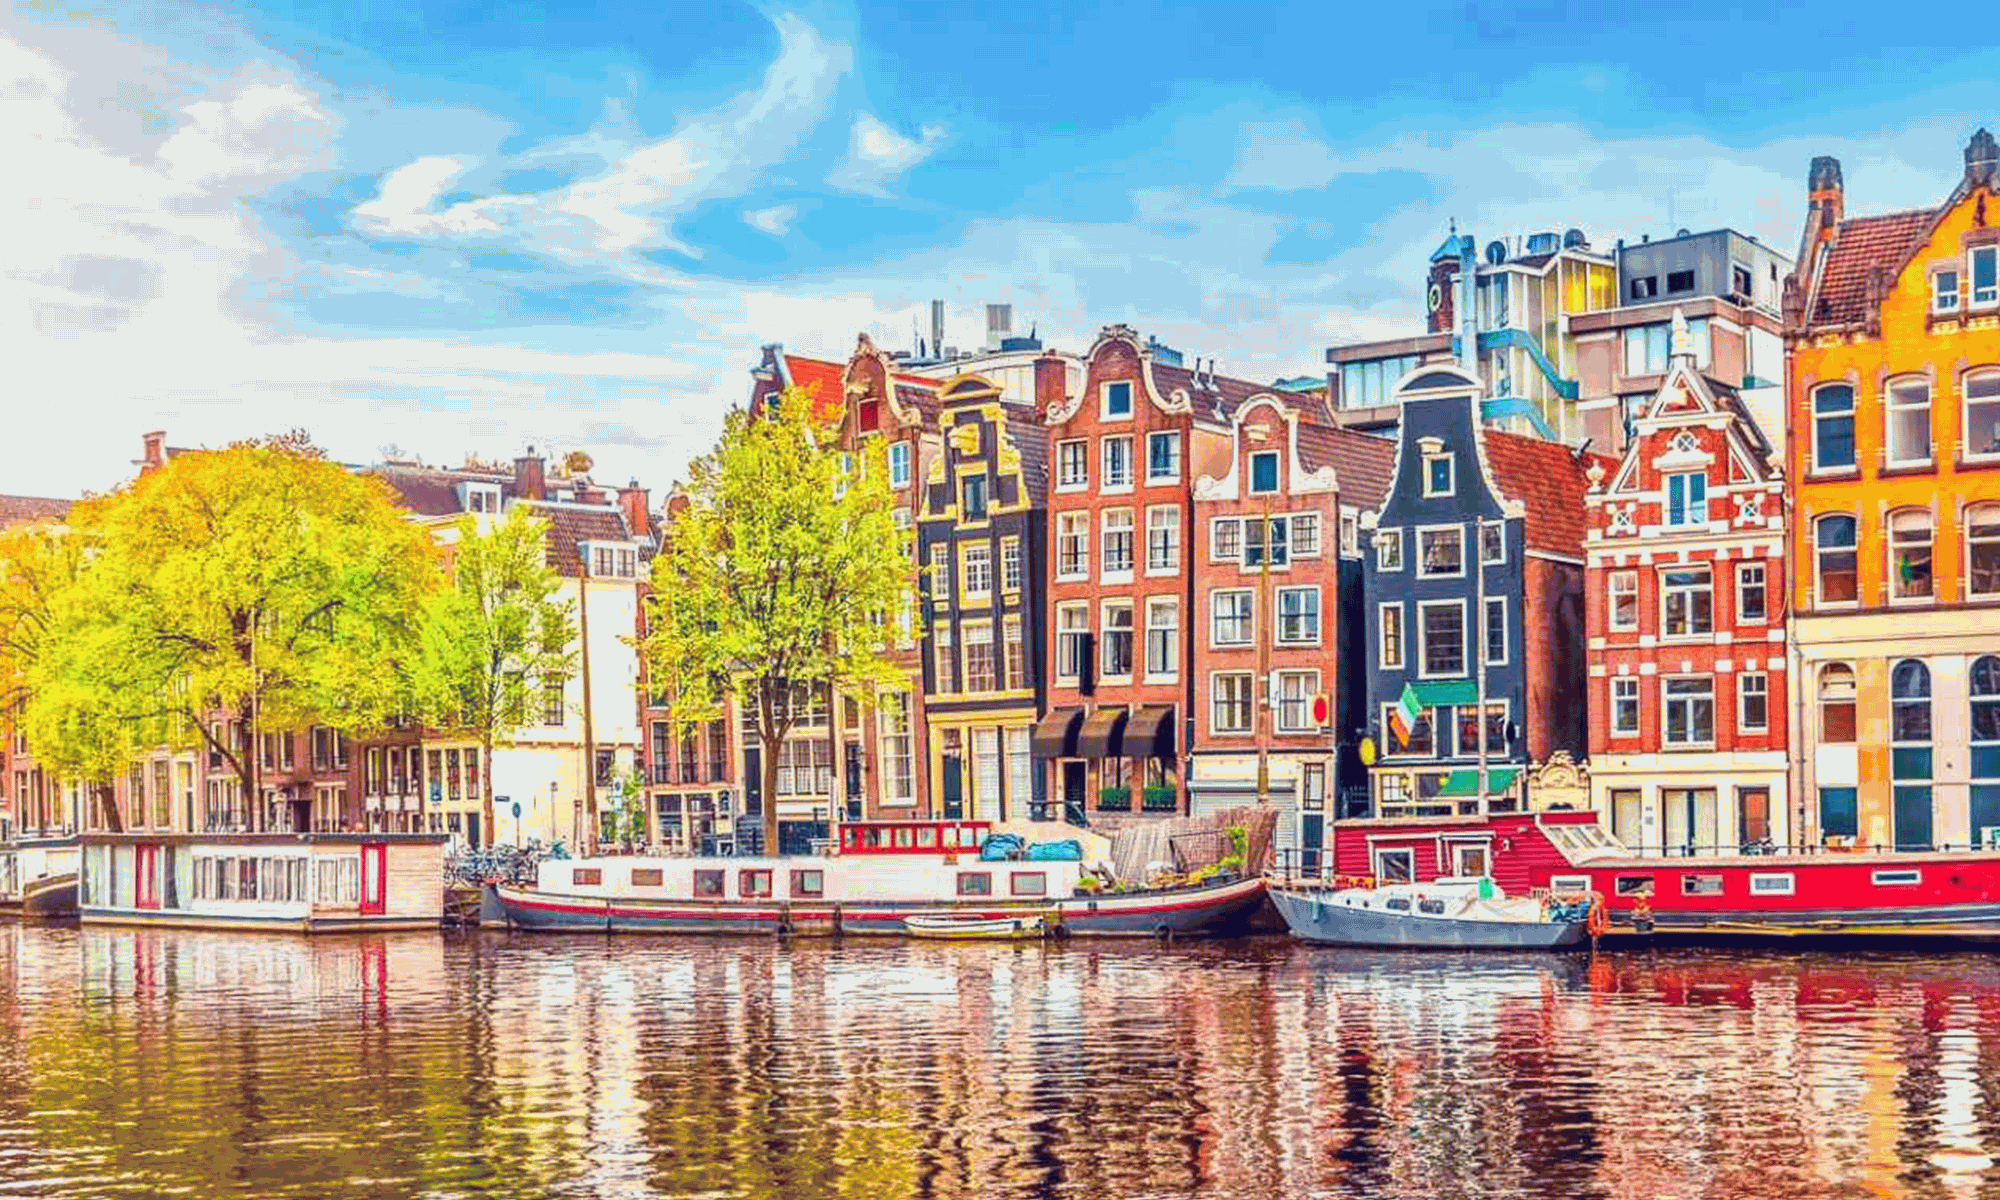 Tourist attractions in Amsterdam